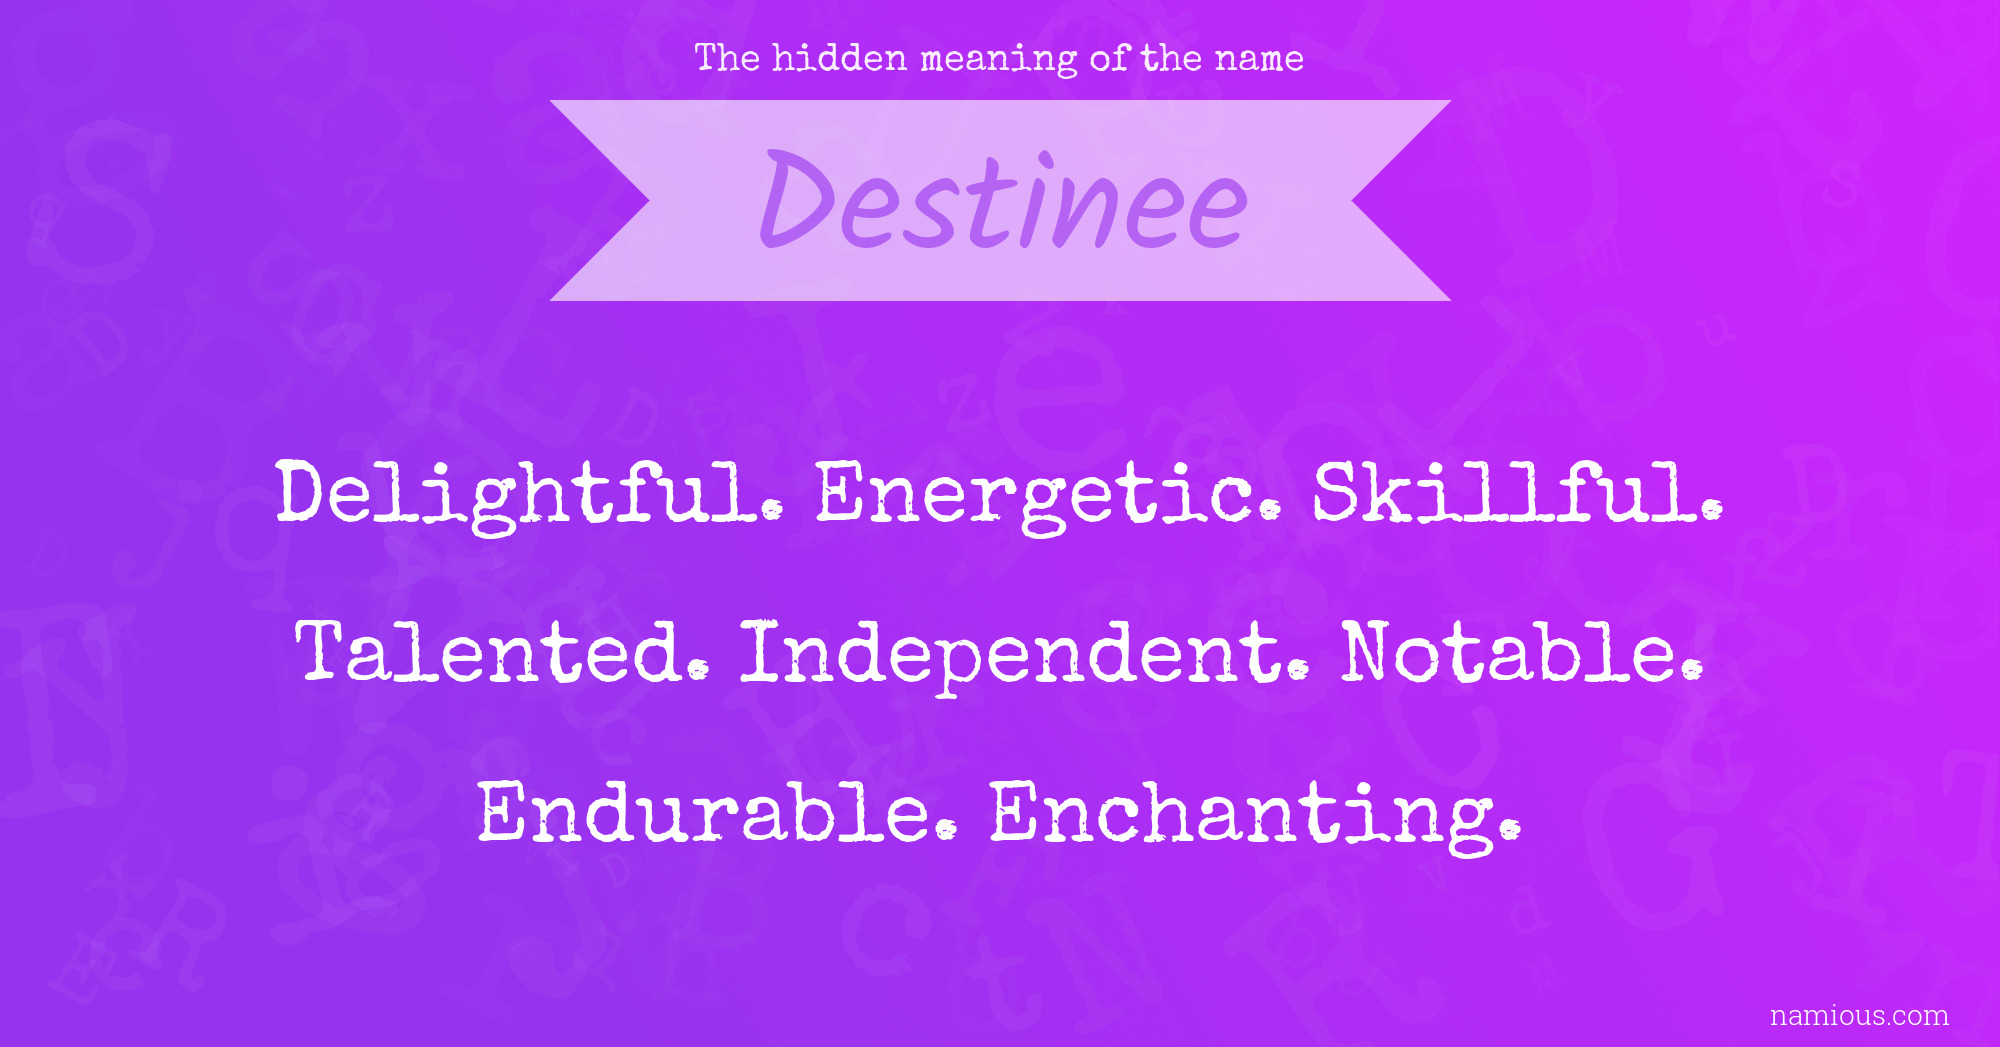 The hidden meaning of the name Destinee